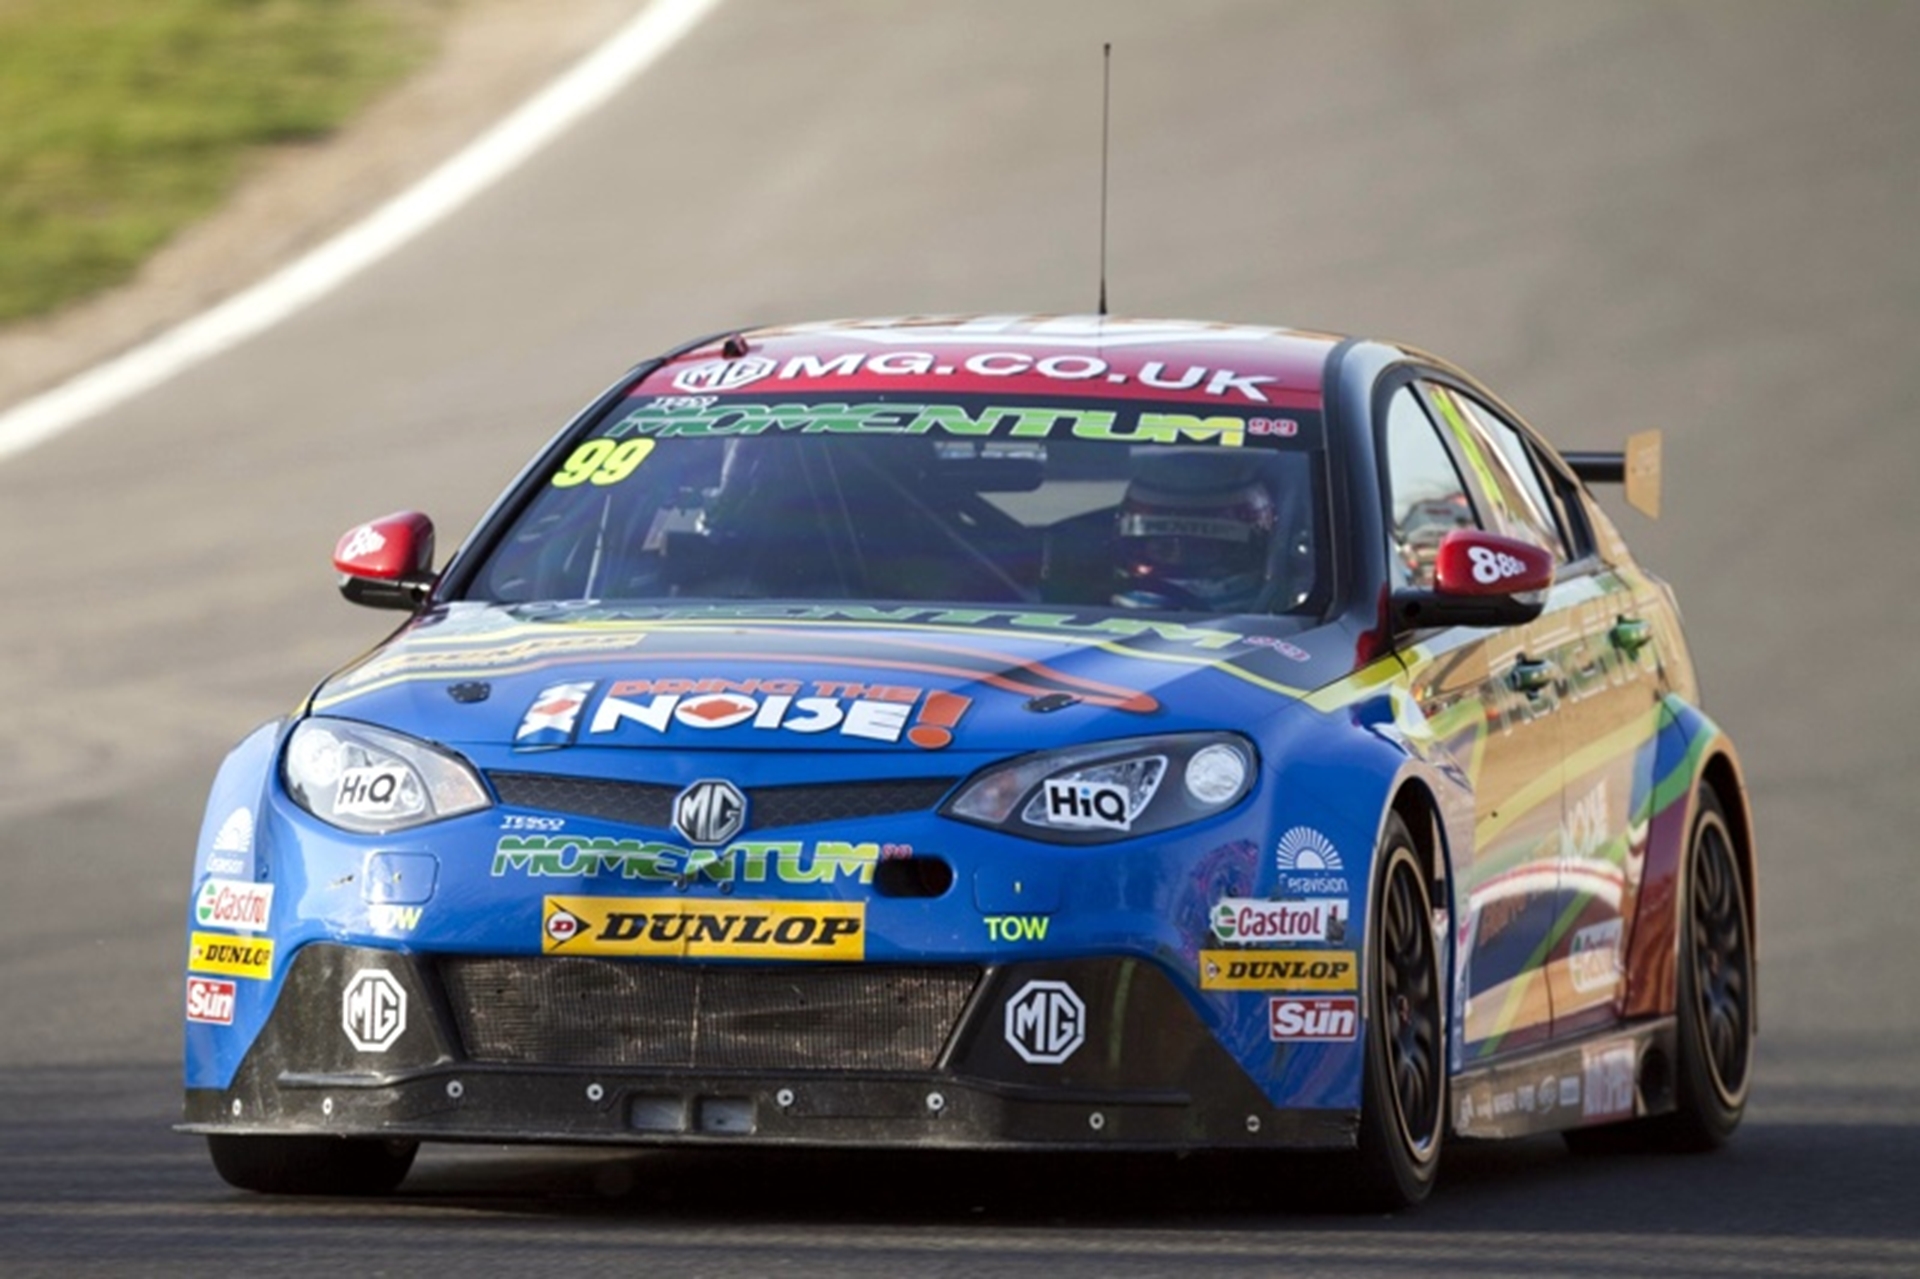 UNDULATING OULTON UP NEXT FOR MG KX MOMENTUM RACING